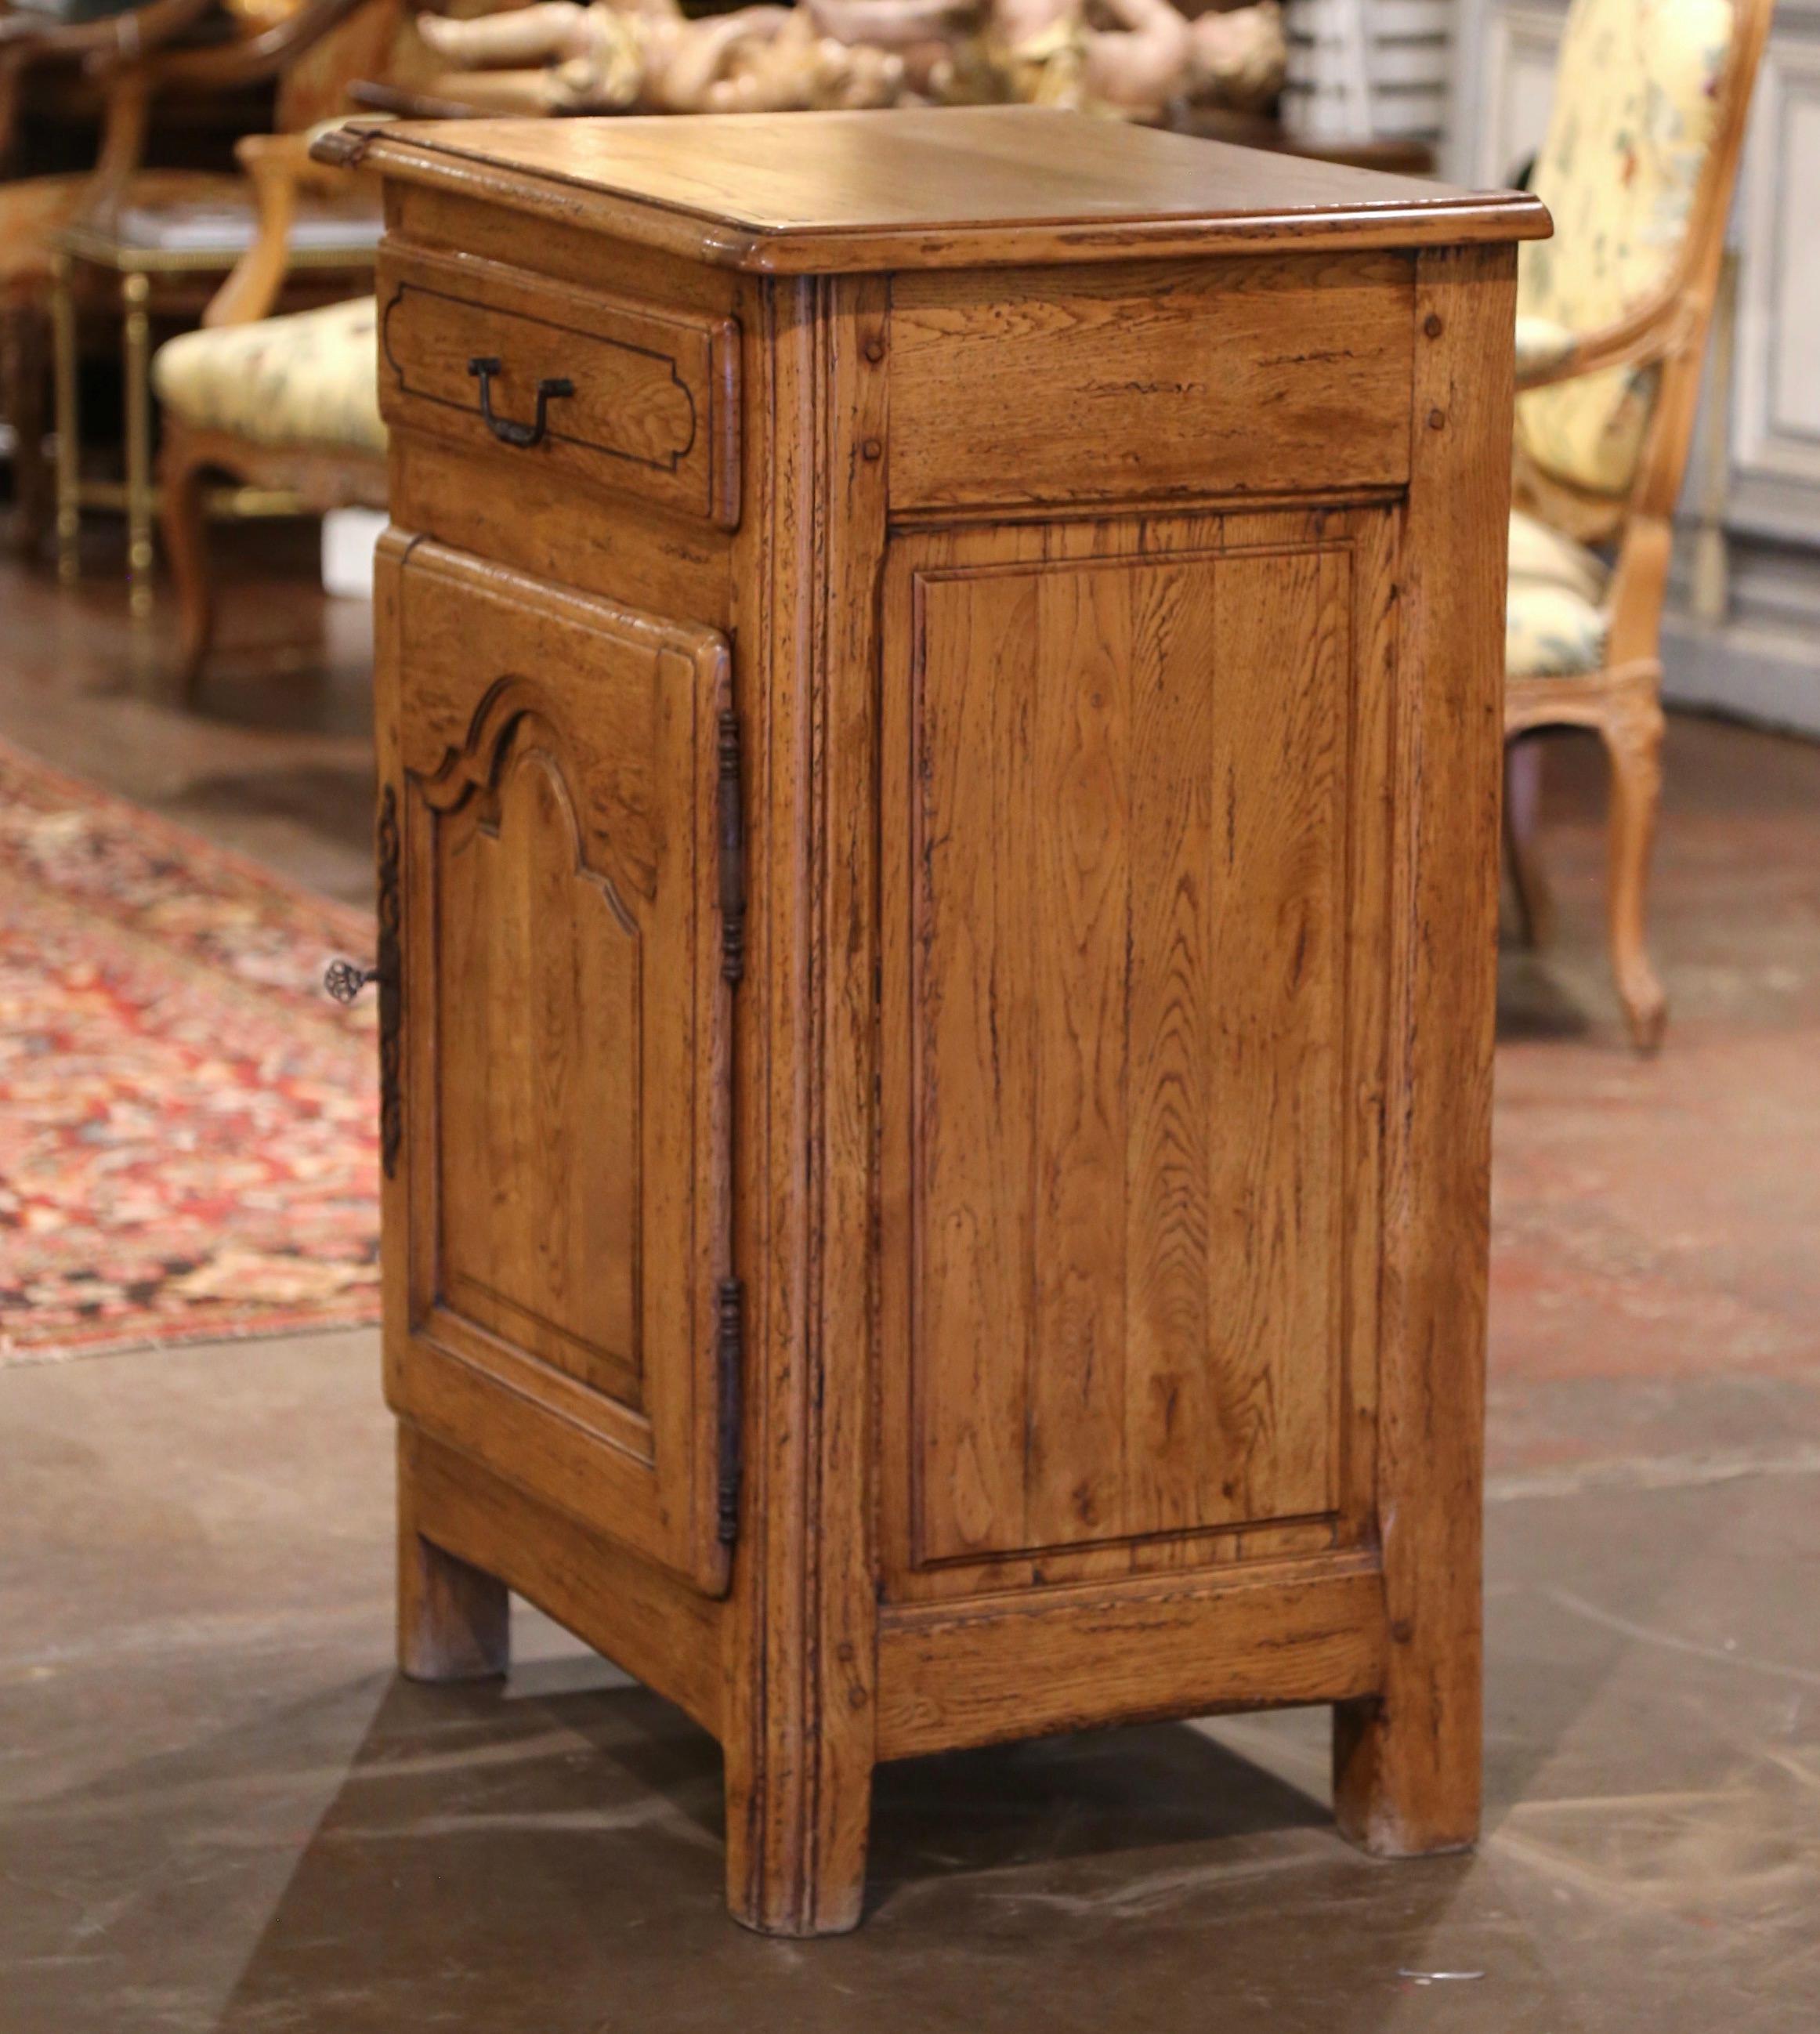 This elegant antique oak cabinet was crafted in Normandy, circa 1970. The provincial confiturier is fitted with a single drawer dressed with iron handle, over a center door decorated with carved raised and arched panel. The inside reveals a middle